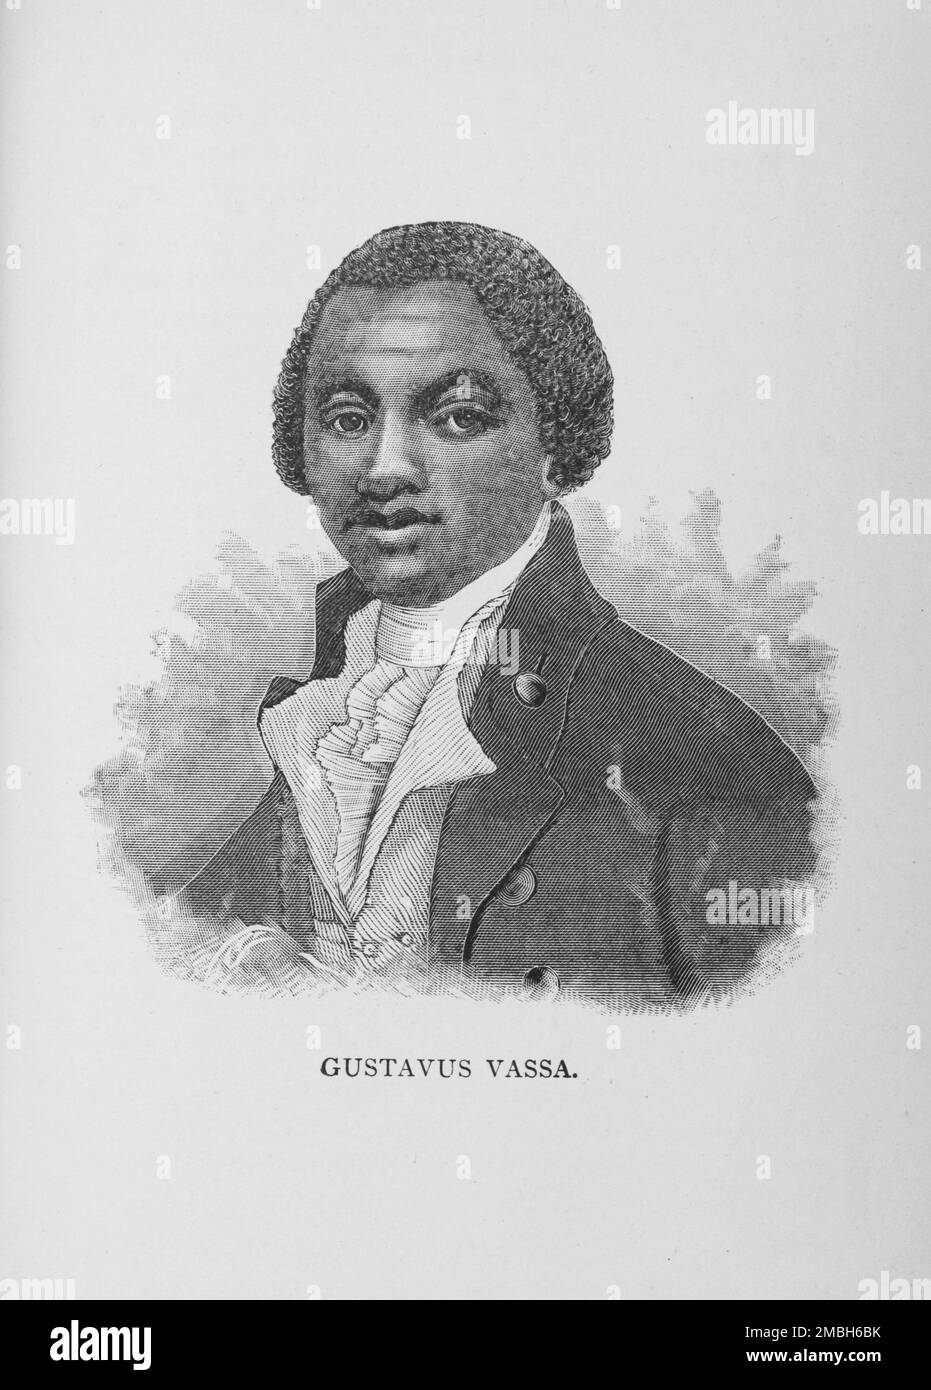 Gustavus Vassa [Olaudah Equiano]., 1887. African author, writer, abolitionist, sailor and merchant: enslaved as a child, he was shipped to the Caribbean and sold to a Royal Navy officer. He purchased his freedom in 1766, and supported the British abolitionist movement in London. Equiano was a member of the Sons of Africa, and published his autobiography, &quot;The Interesting Narrative of the Life of Olaudah Equiano&quot; (1789), which depicted the horrors of slavery. From &quot;Men of Mark: Eminent, Progressive and Rising&quot; by William J. Simmons. Stock Photo